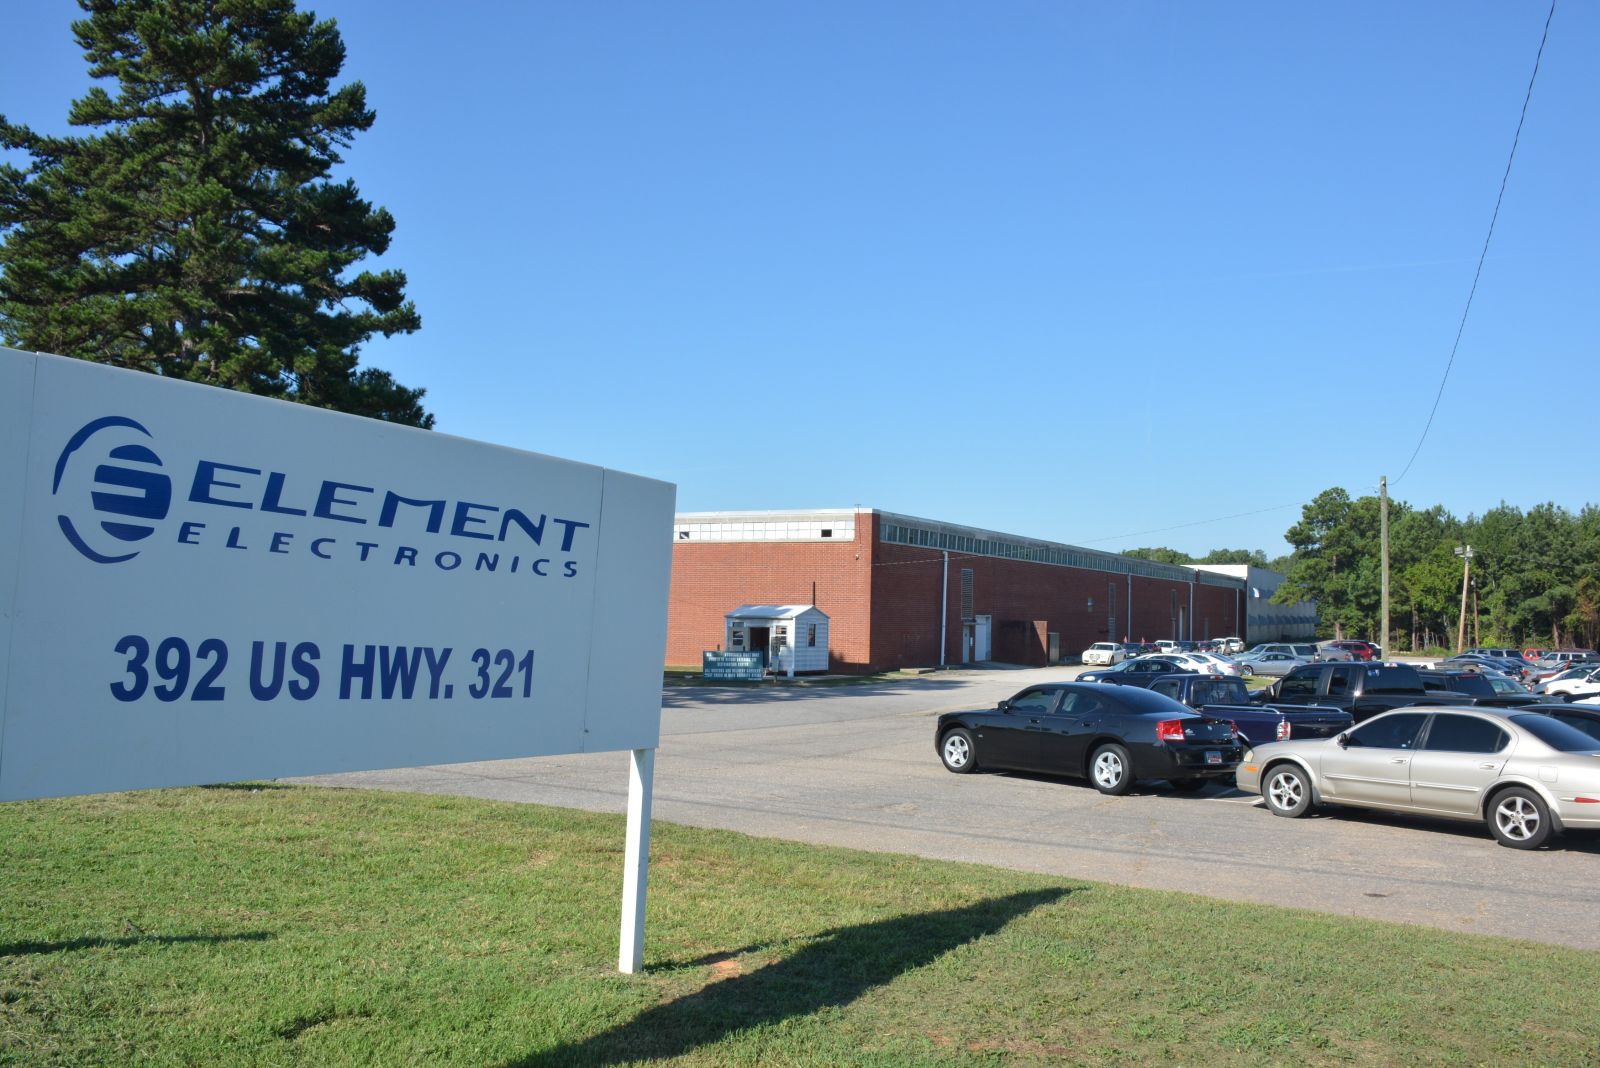 Element Electronics has been removed from a tariffs list and says it will not have to close its Winnsboro TV manufacturing plant. (Photo/File)